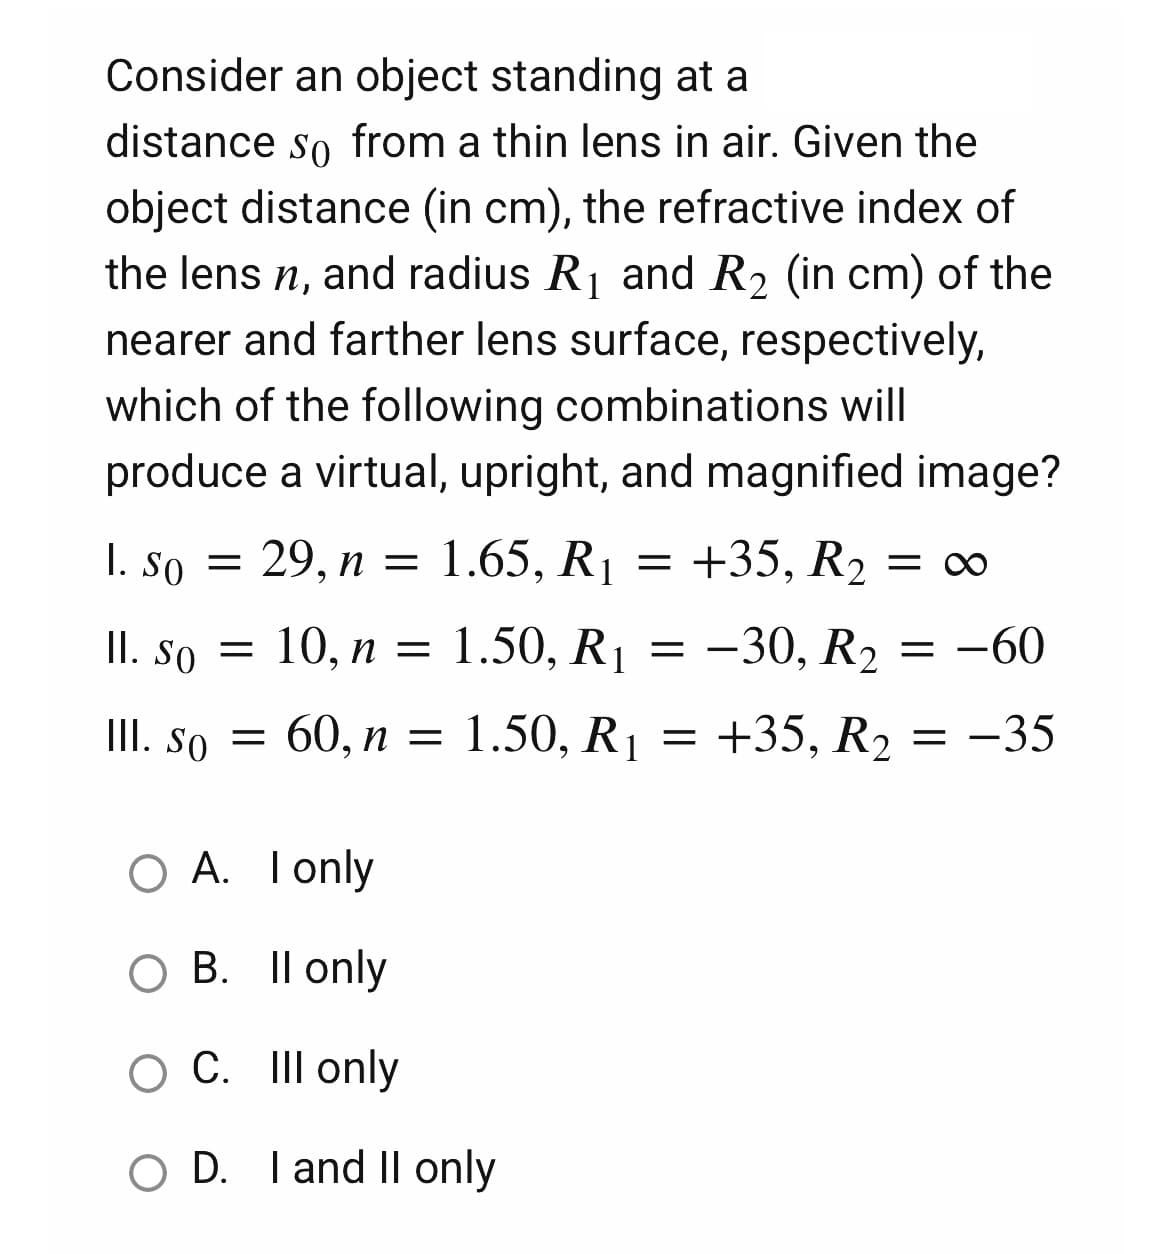 Consider an object standing at a
distance so from a thin lens in air. Given the
object distance (in cm), the refractive index of
the lens n, and radius R₁ and R₂ (in cm) of the
nearer and farther lens surface, respectively,
which of the following combinations will
produce a virtual, upright, and magnified image?
29, n = 1.65, R₁ = +35, R₂ = ∞
1. So =
II. So = 10, n
10, n =
=
1.50, R₁ =
-30, R₂ = −60
III. So =
60, n =
1.50, R₁
=
+35, R₂ = -35
O A. I only
O B. II only
O C. III only
OD. I and II only